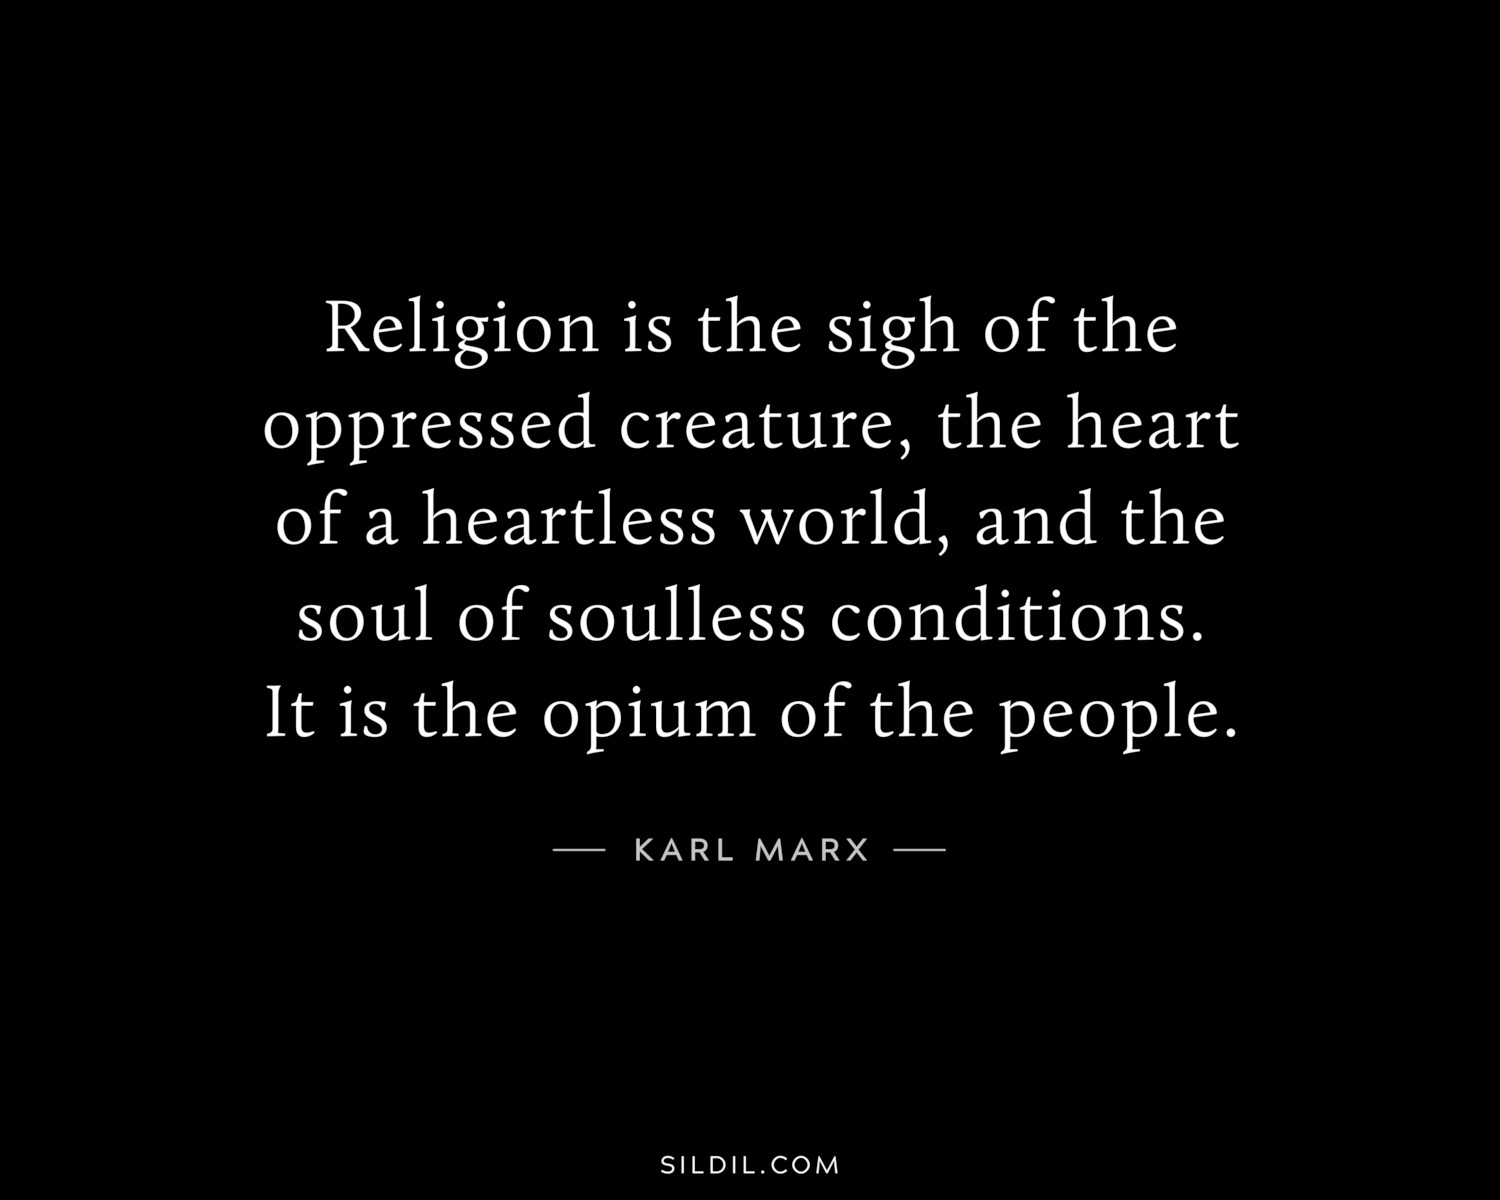 Religion is the sigh of the oppressed creature, the heart of a heartless world, and the soul of soulless conditions. It is the opium of the people.